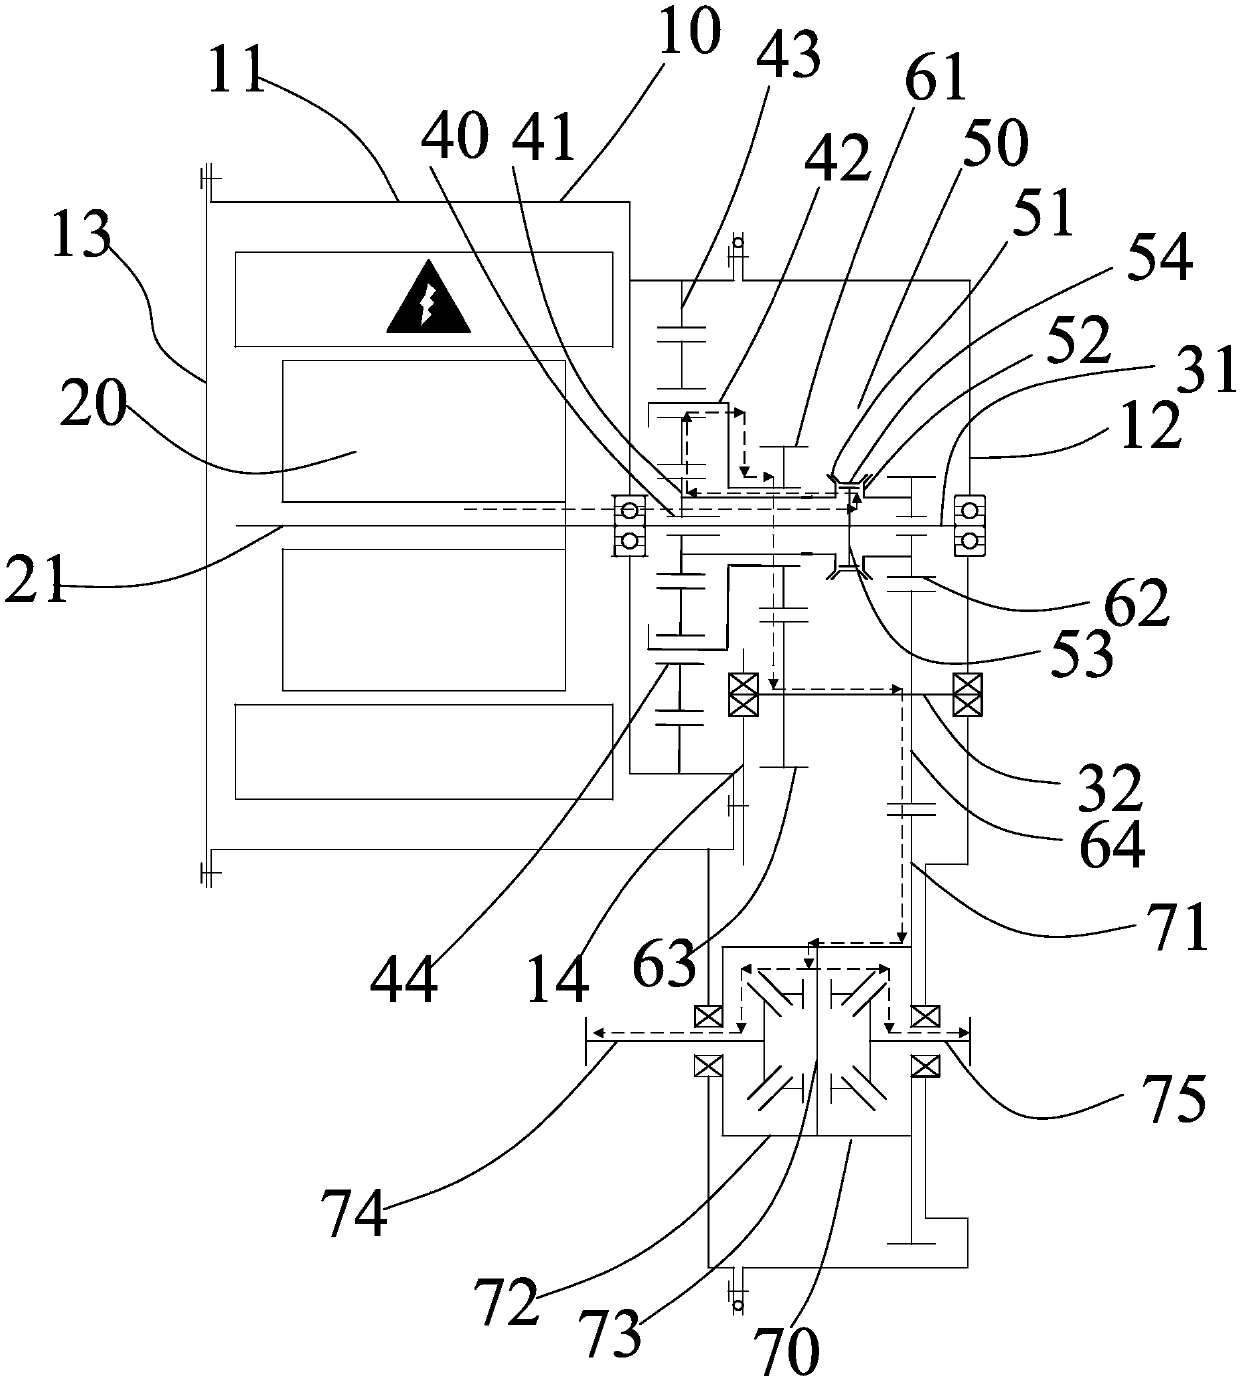 Electrical bridge driving system and vehicle